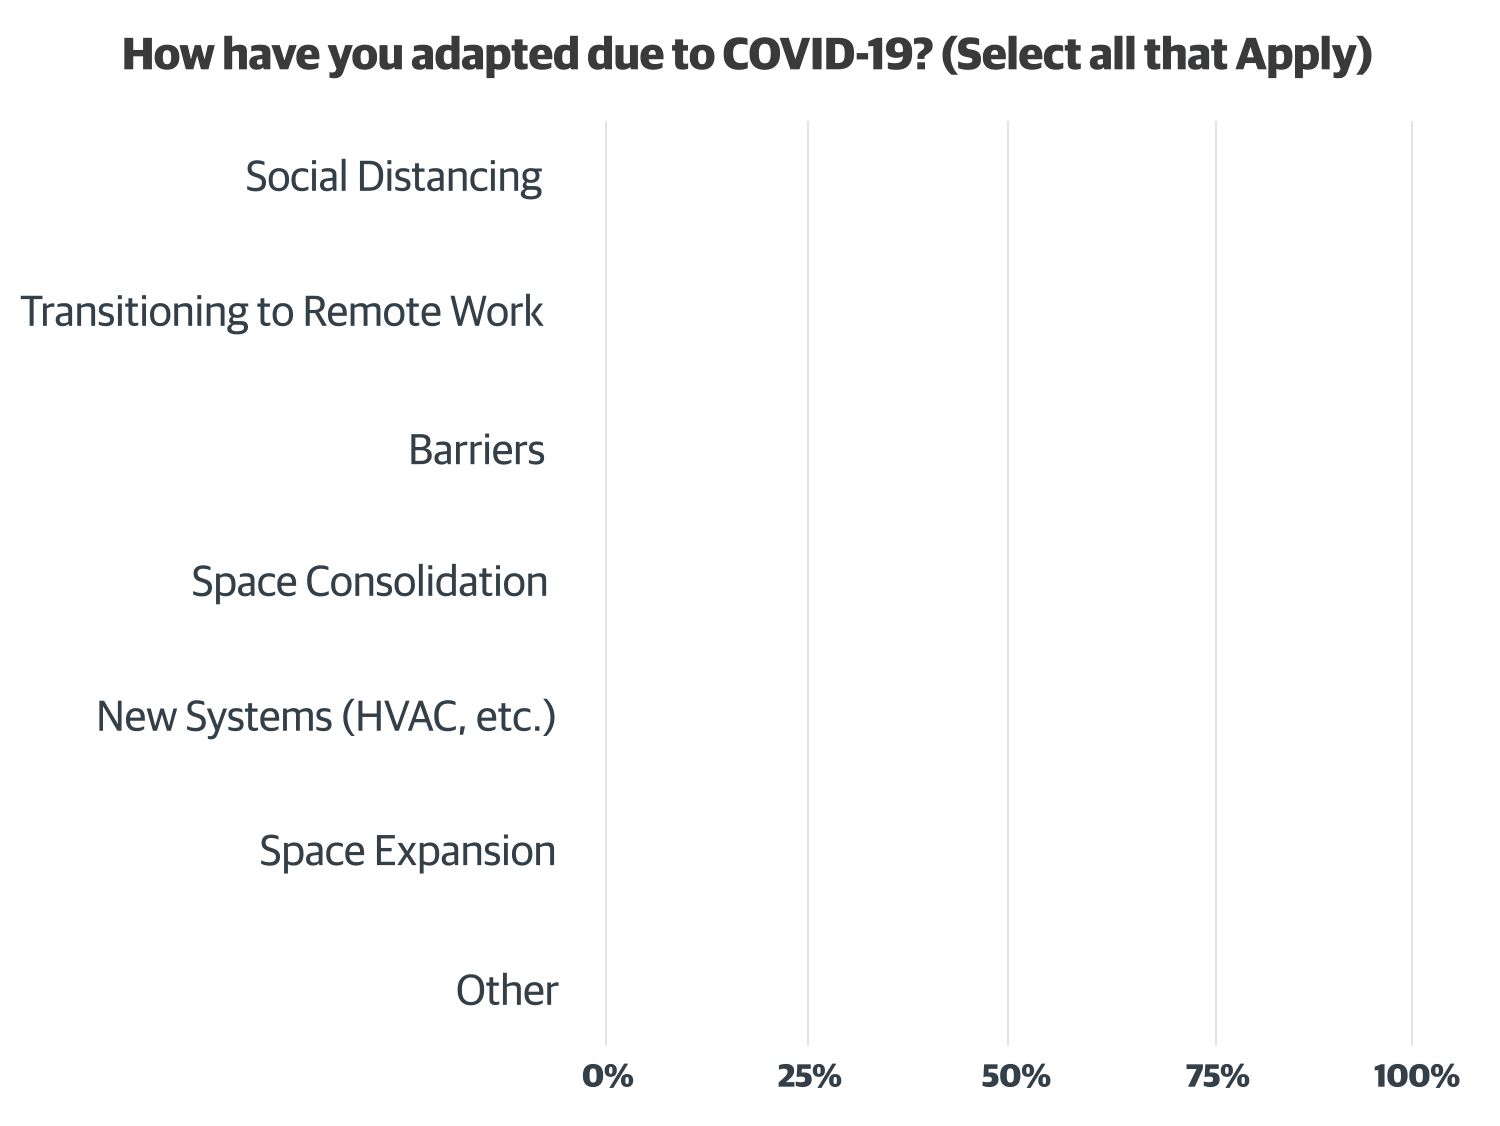 How have you adapted due to COVID-19